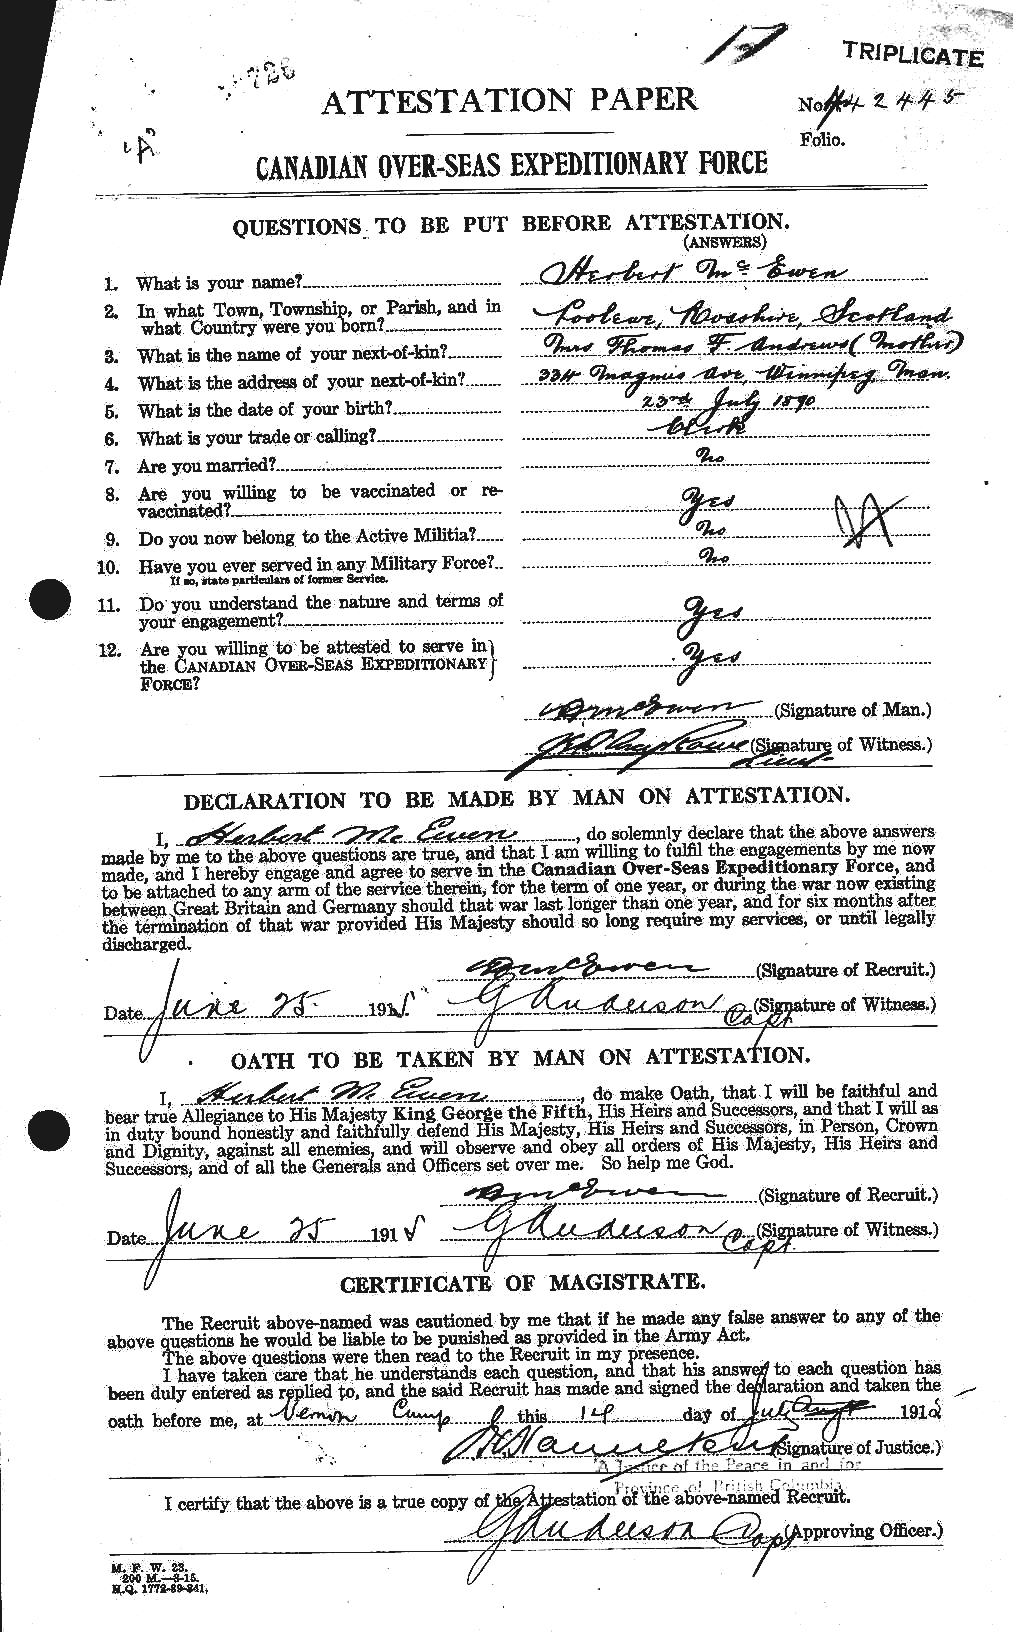 Personnel Records of the First World War - CEF 520933a